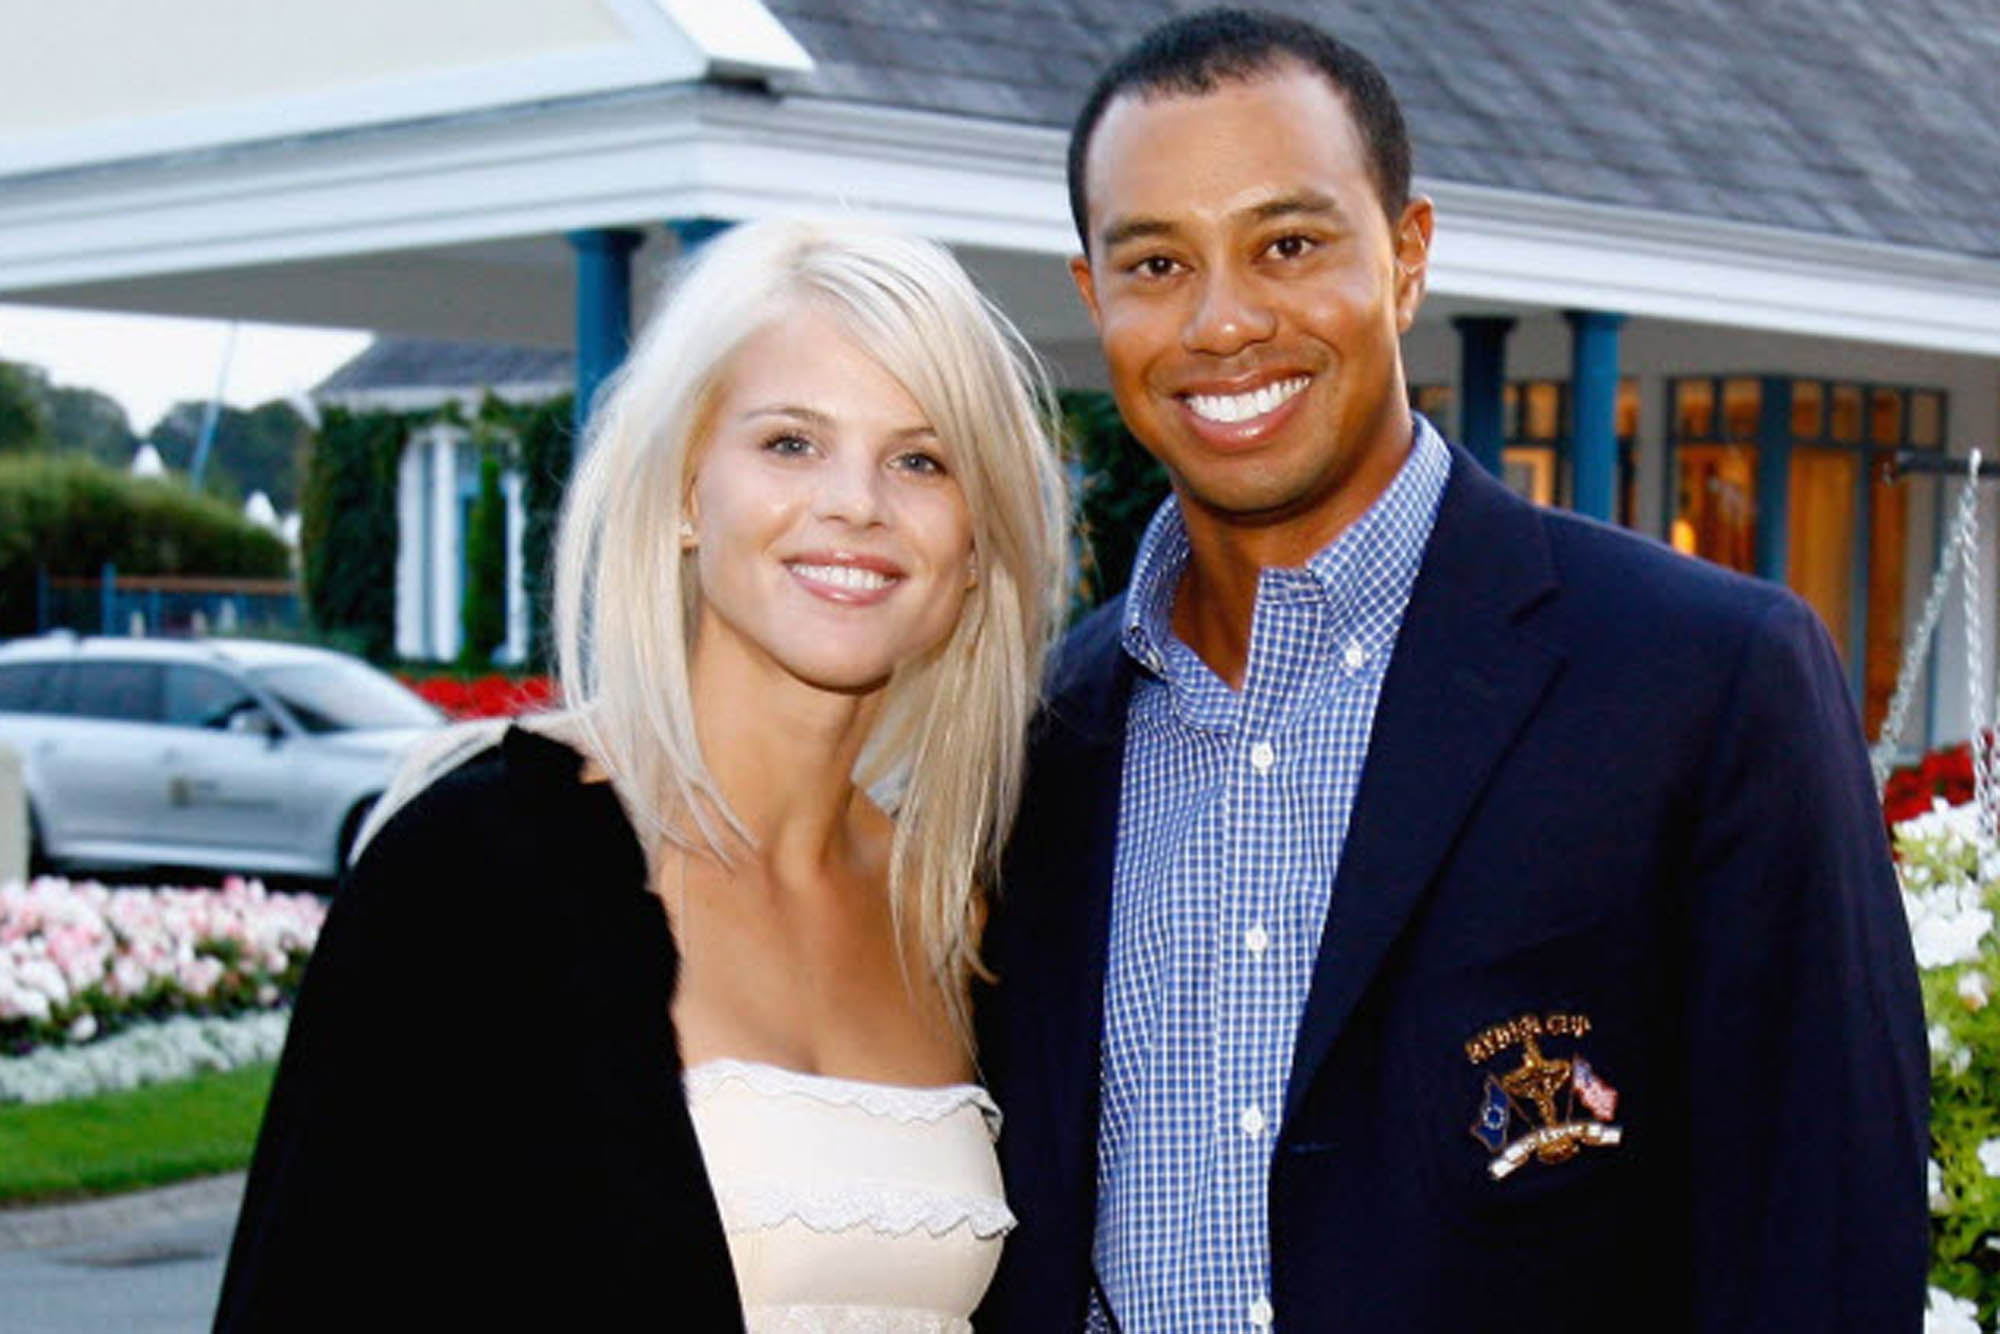 Is tiger dating lindsey